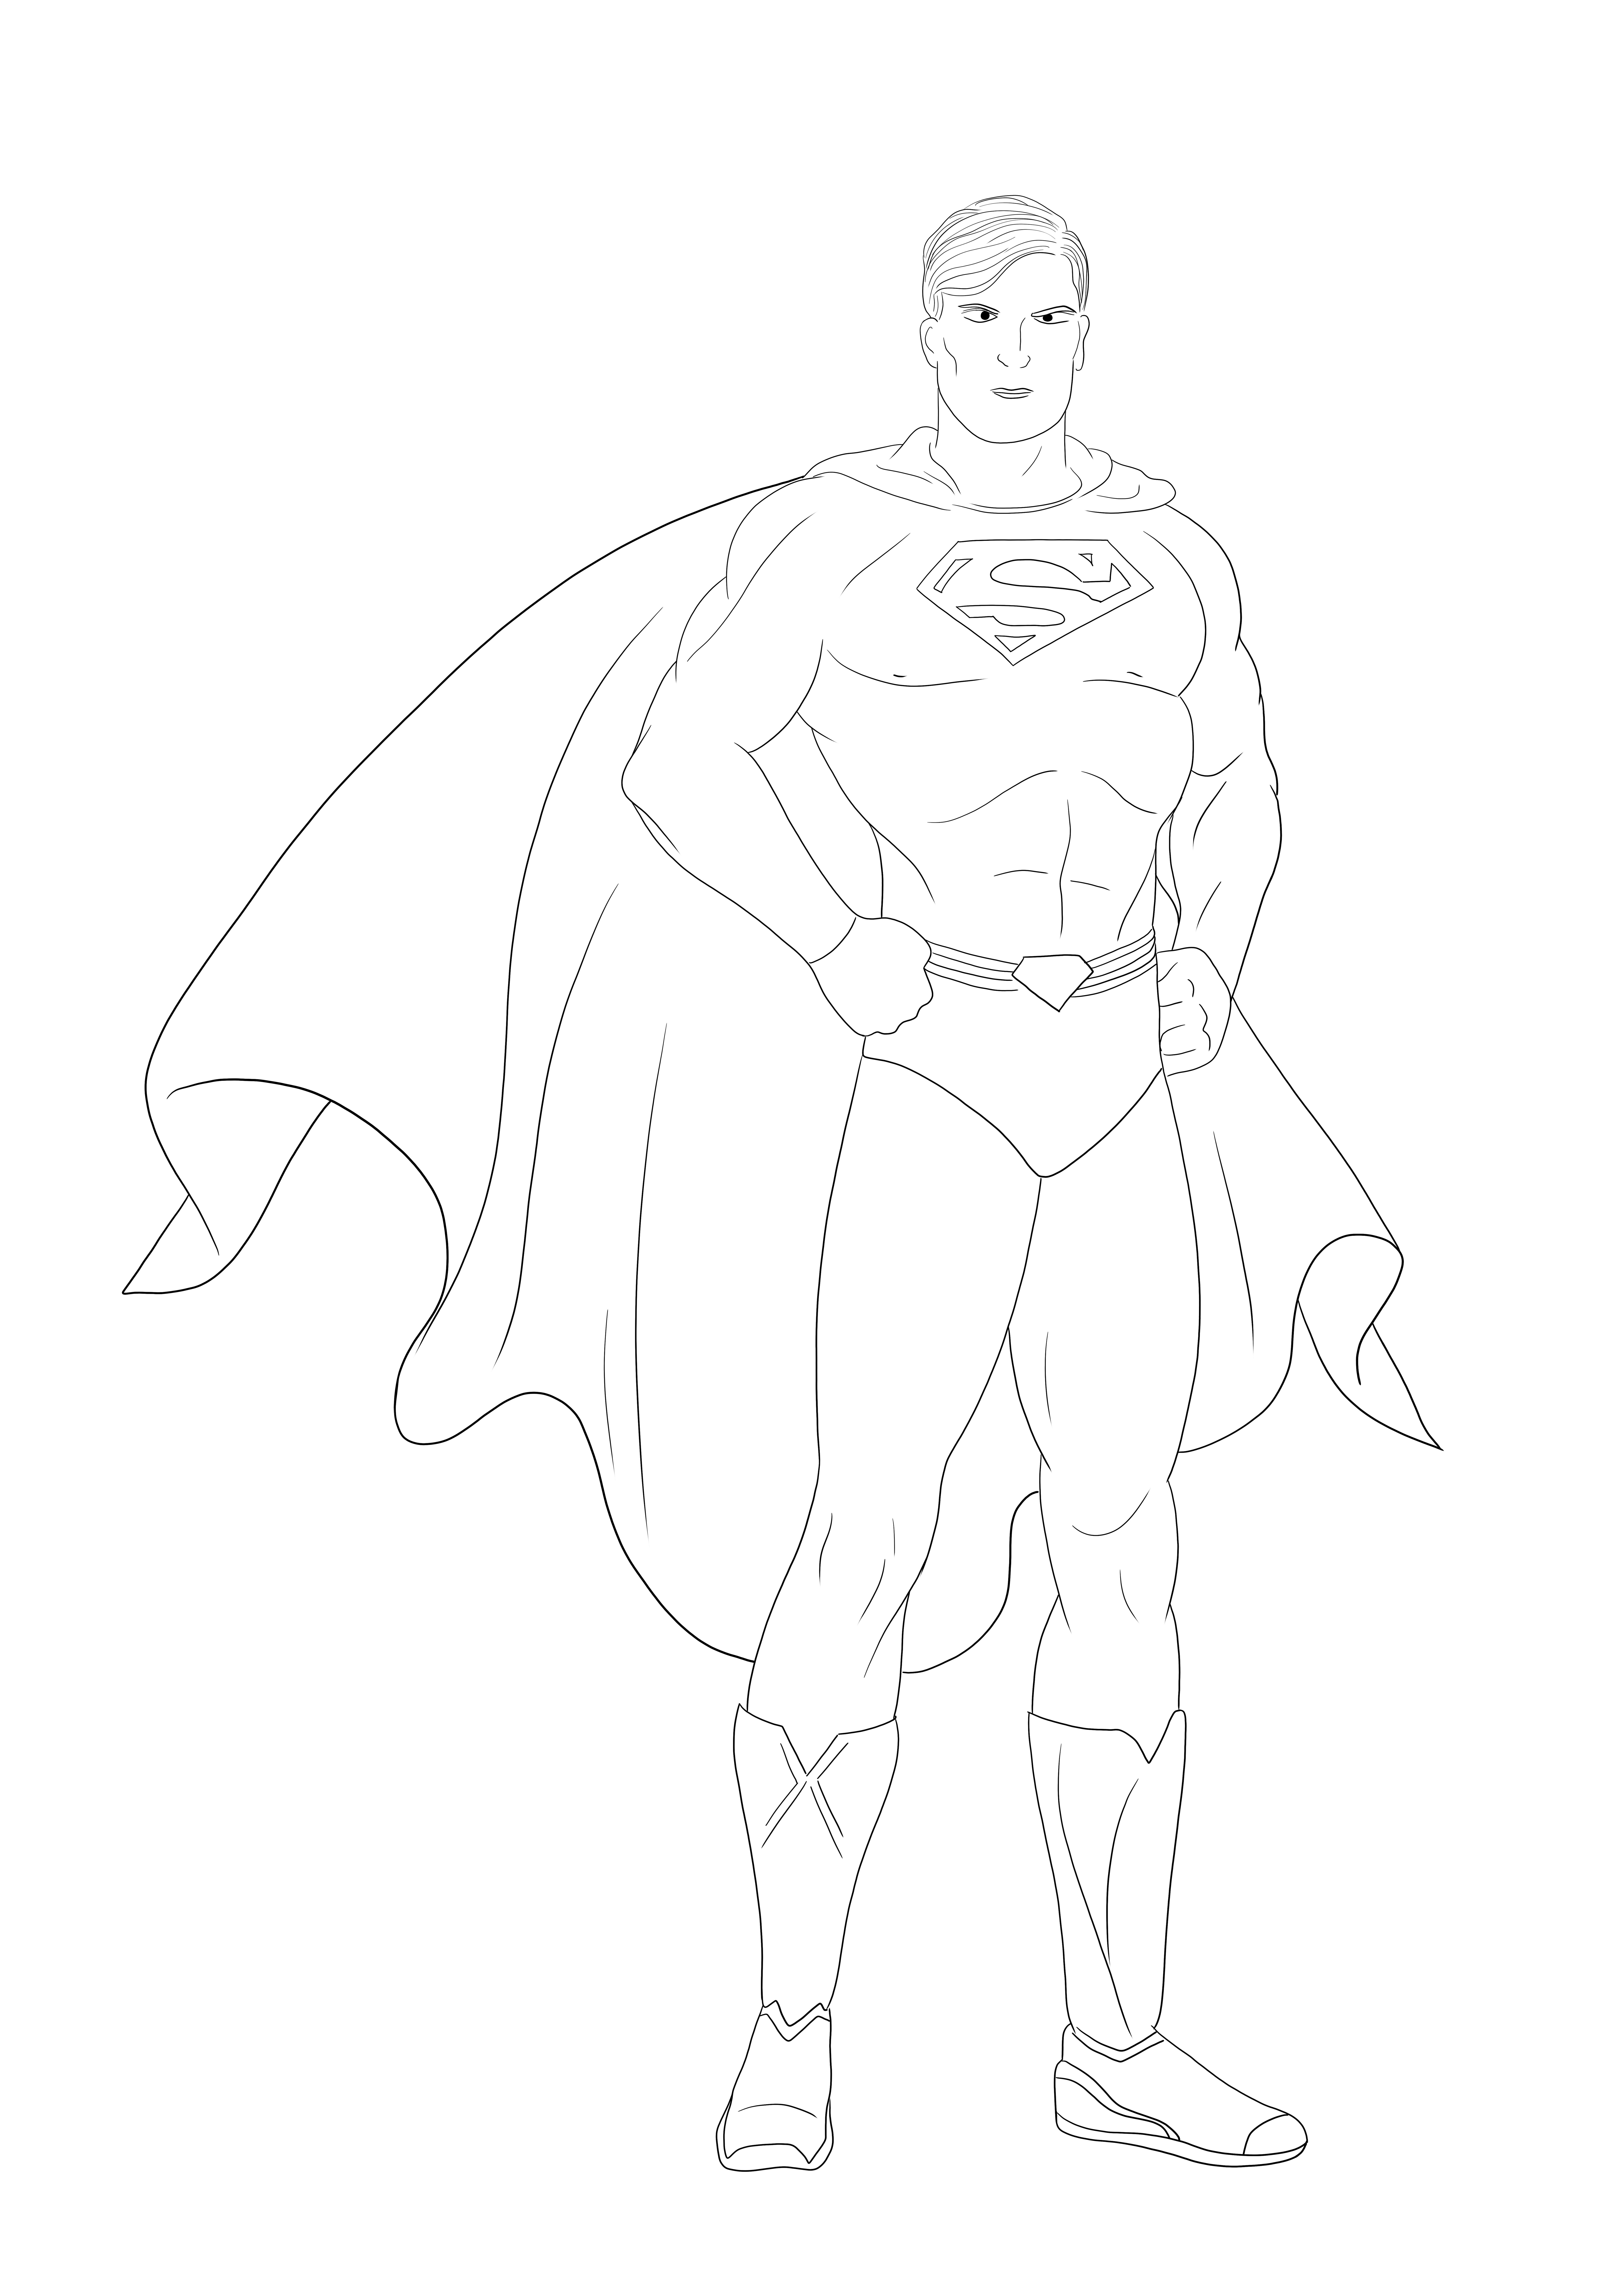 Free printing and coloring of one of the bravest Marvel heroes- Superman